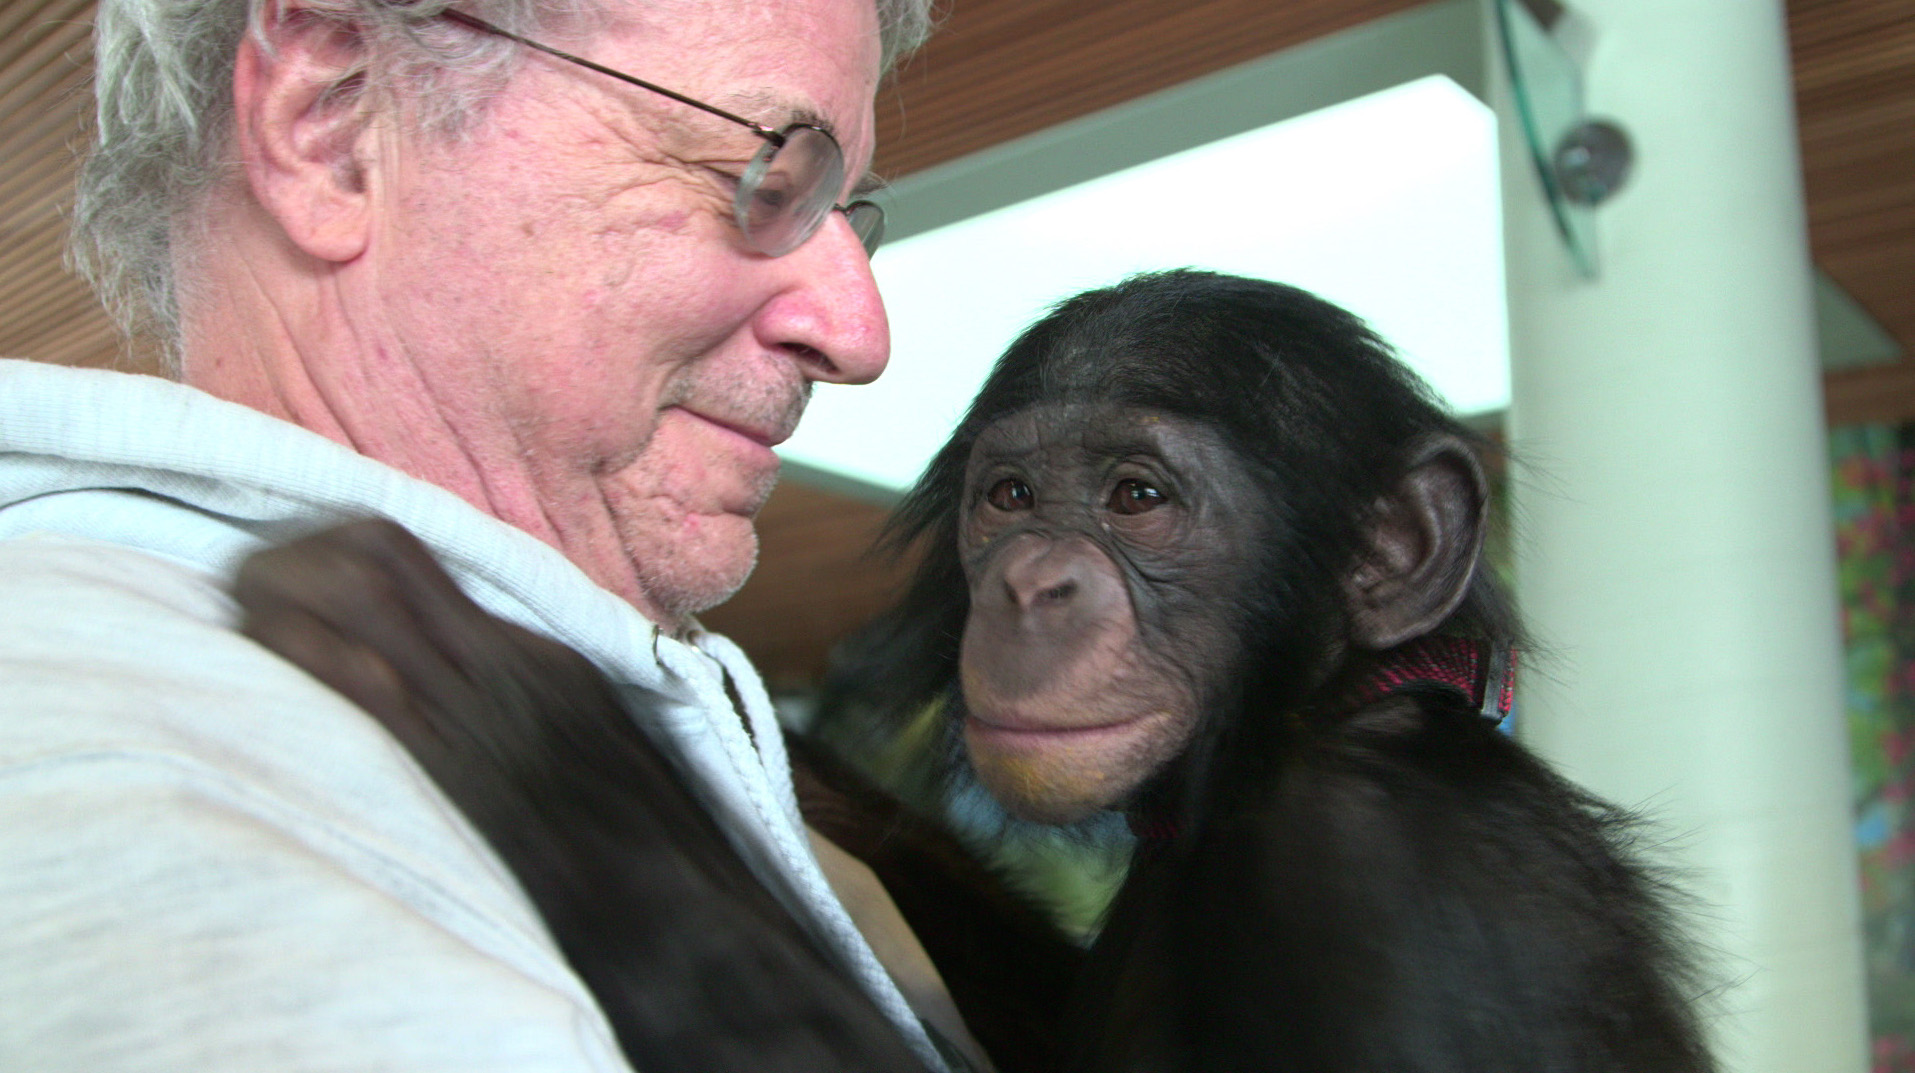 Should A Chimpanzee Be Considered A Person?